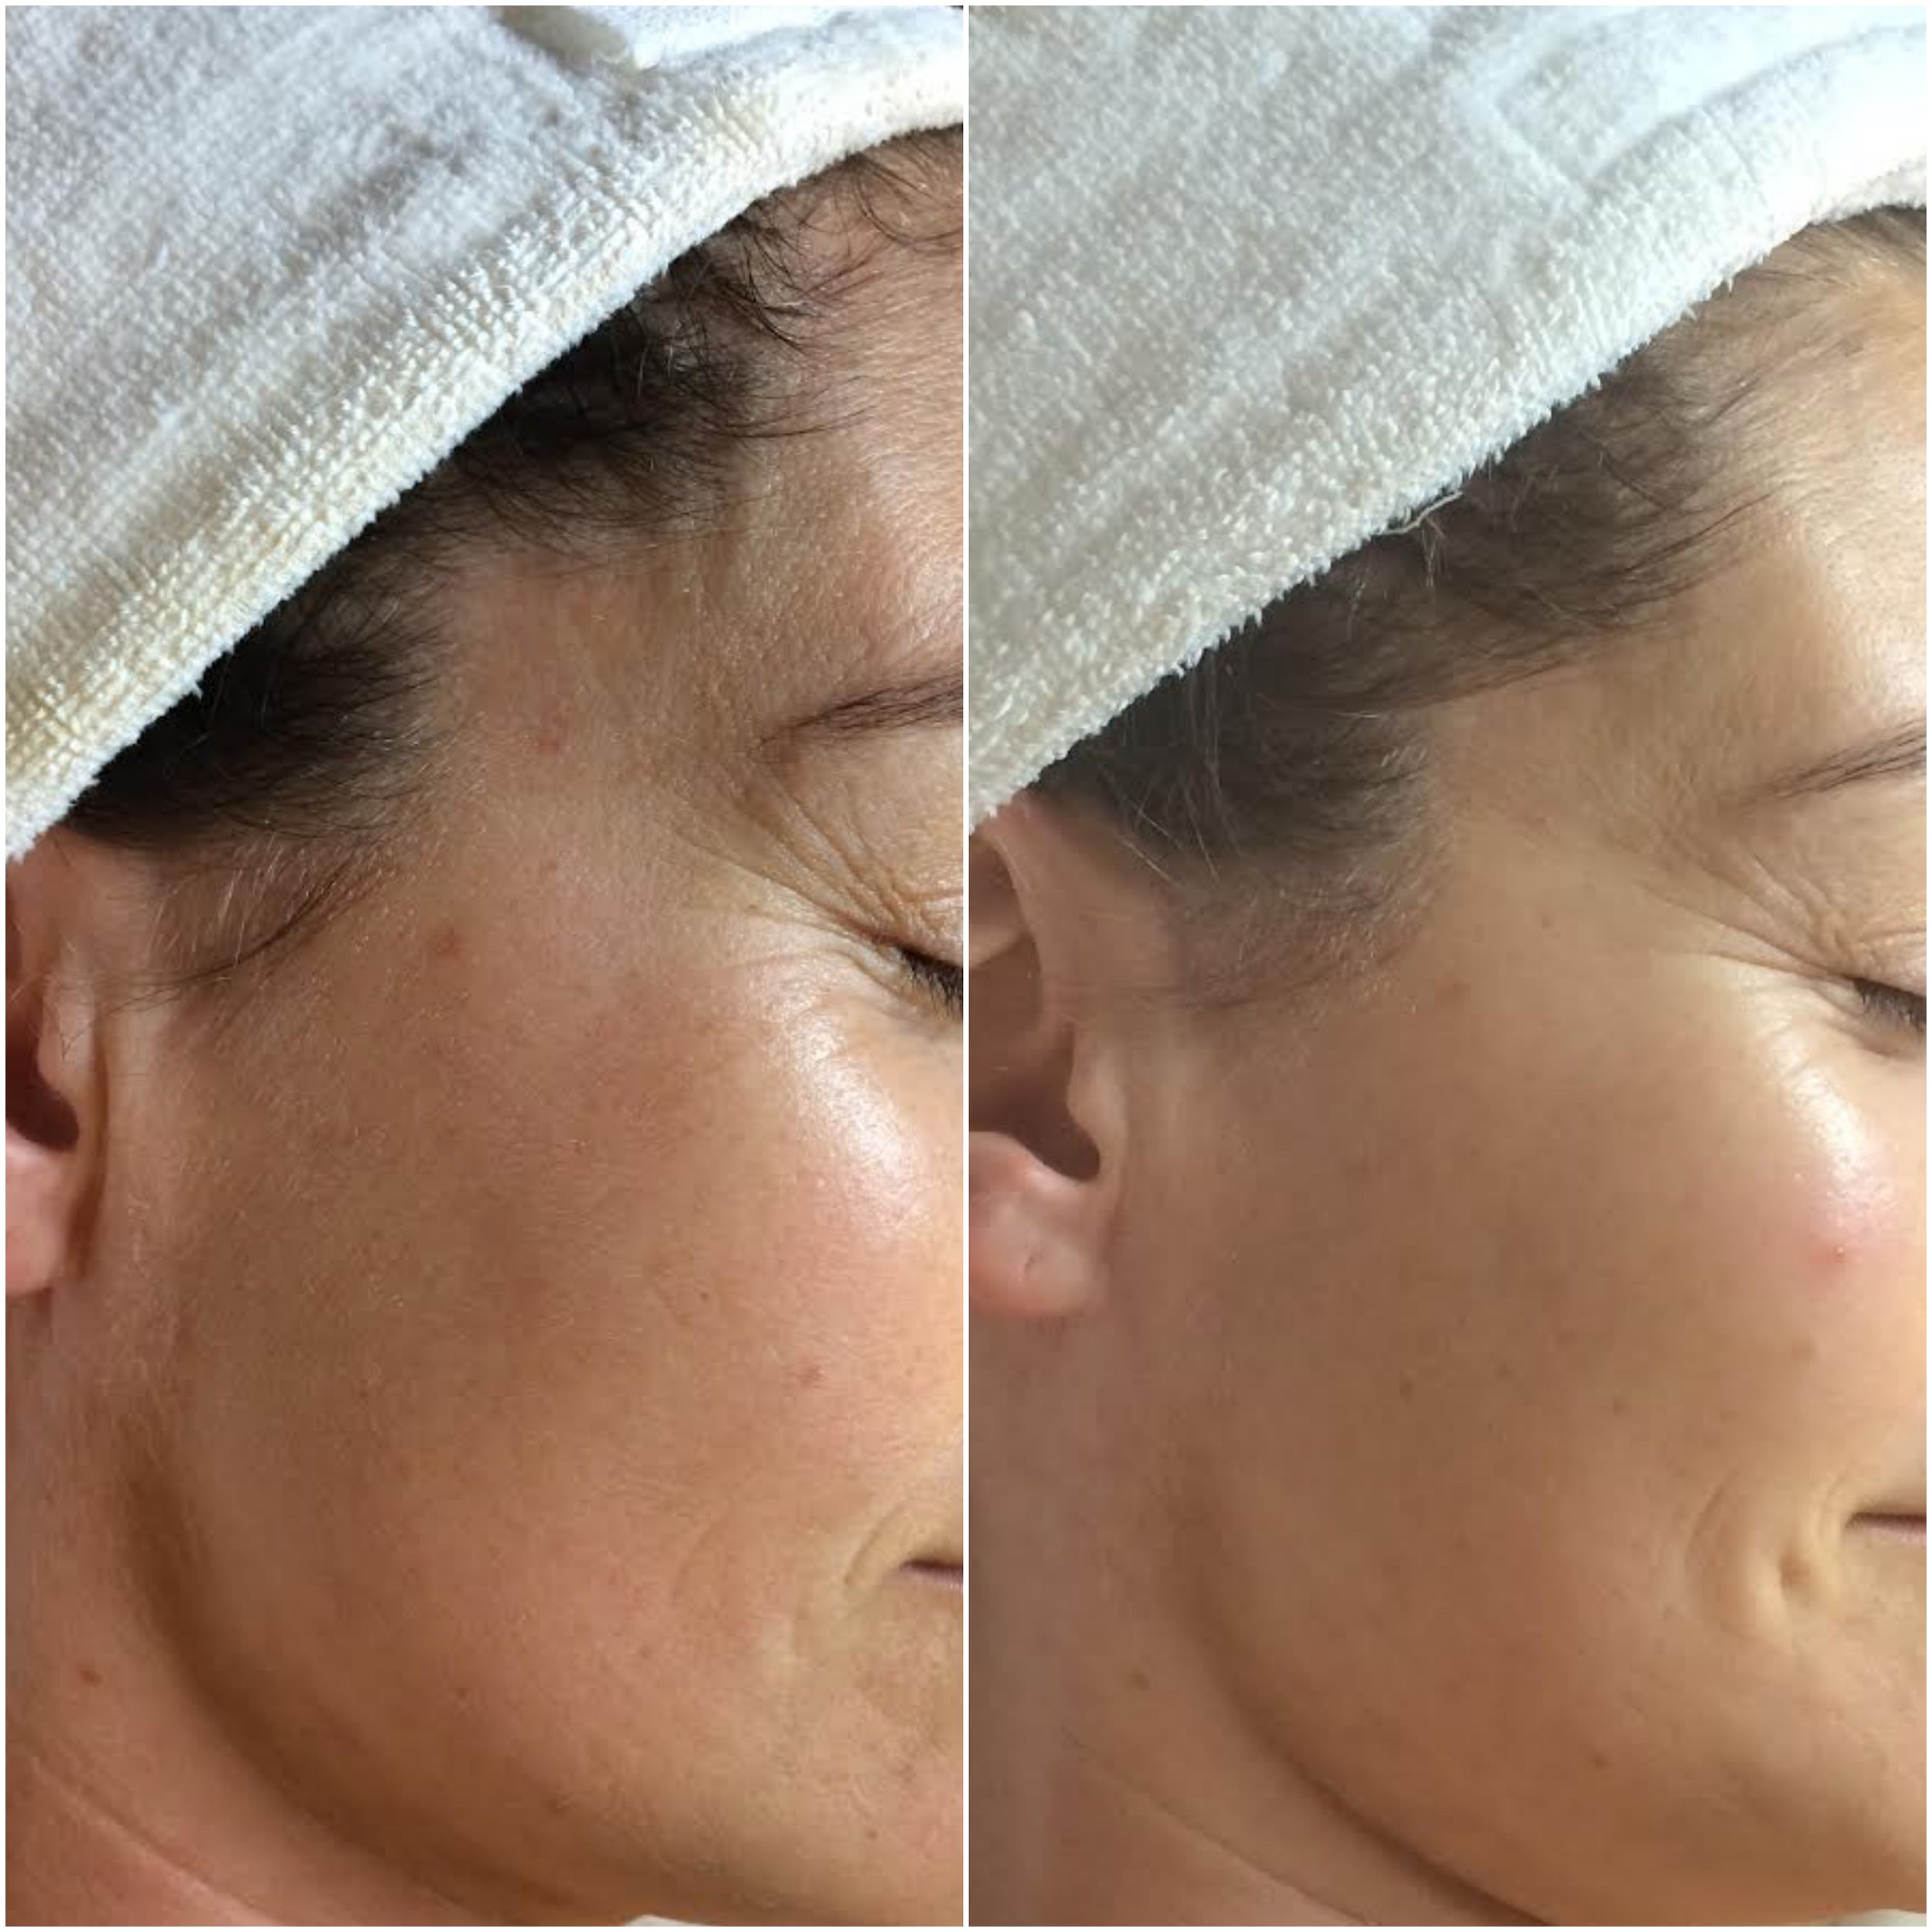   Collagen increased, fine lines filled using human stem cell microneedling series  